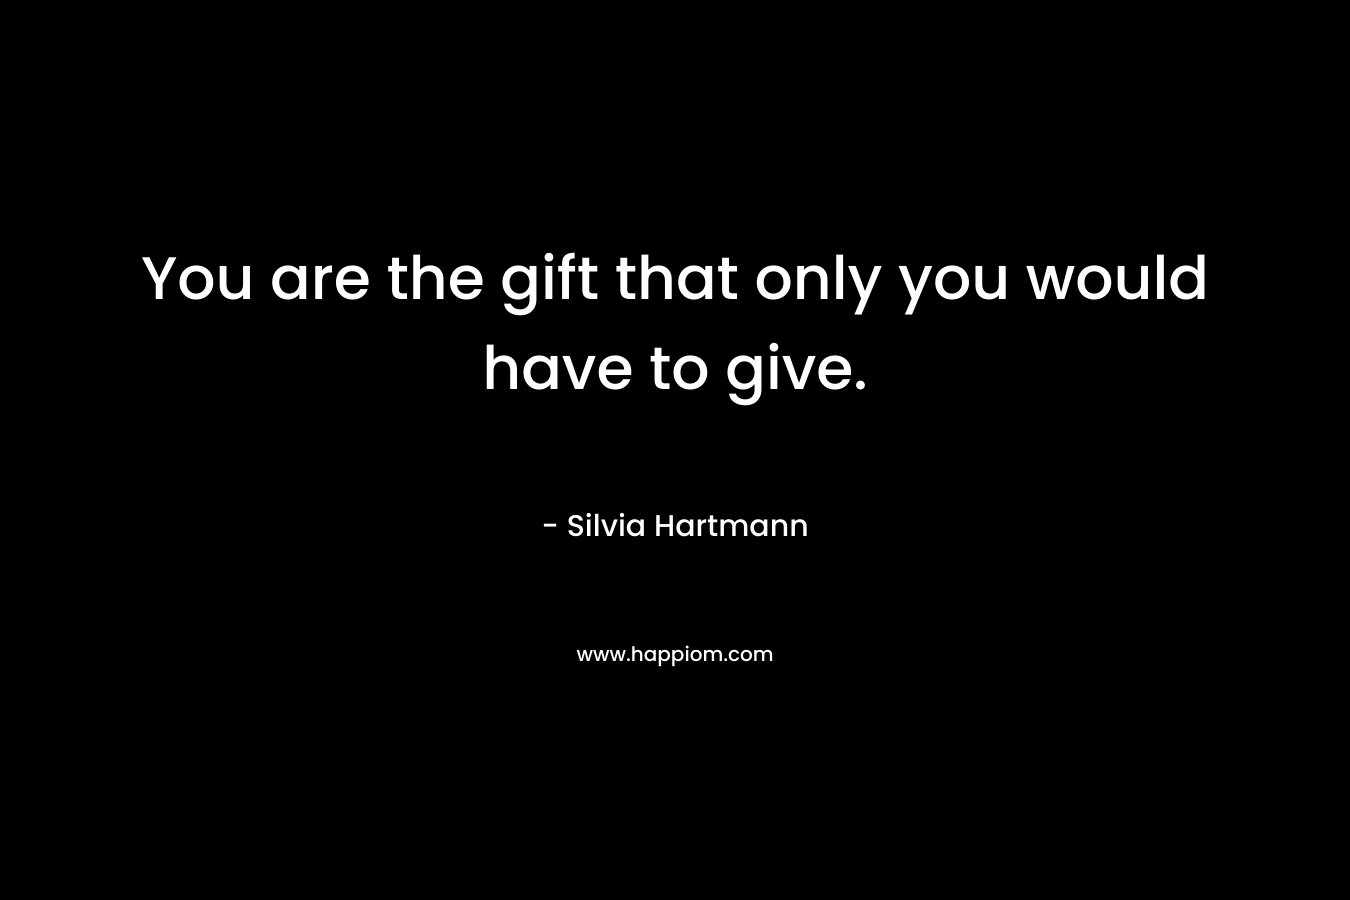 You are the gift that only you would have to give. – Silvia Hartmann